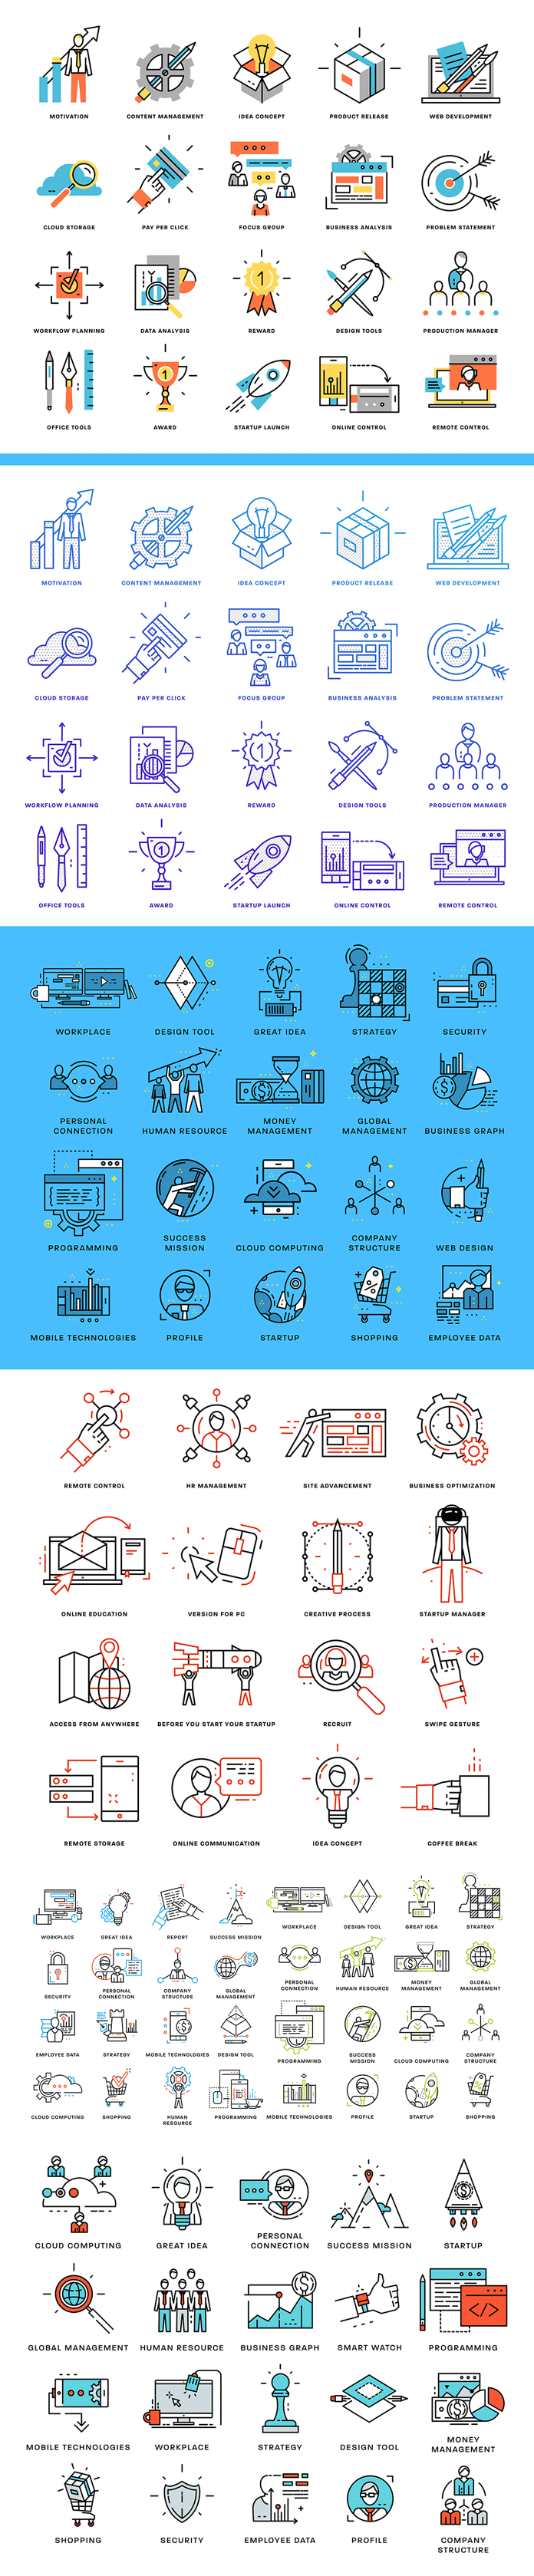 Simple vector icons in diverse categories and different color variants.